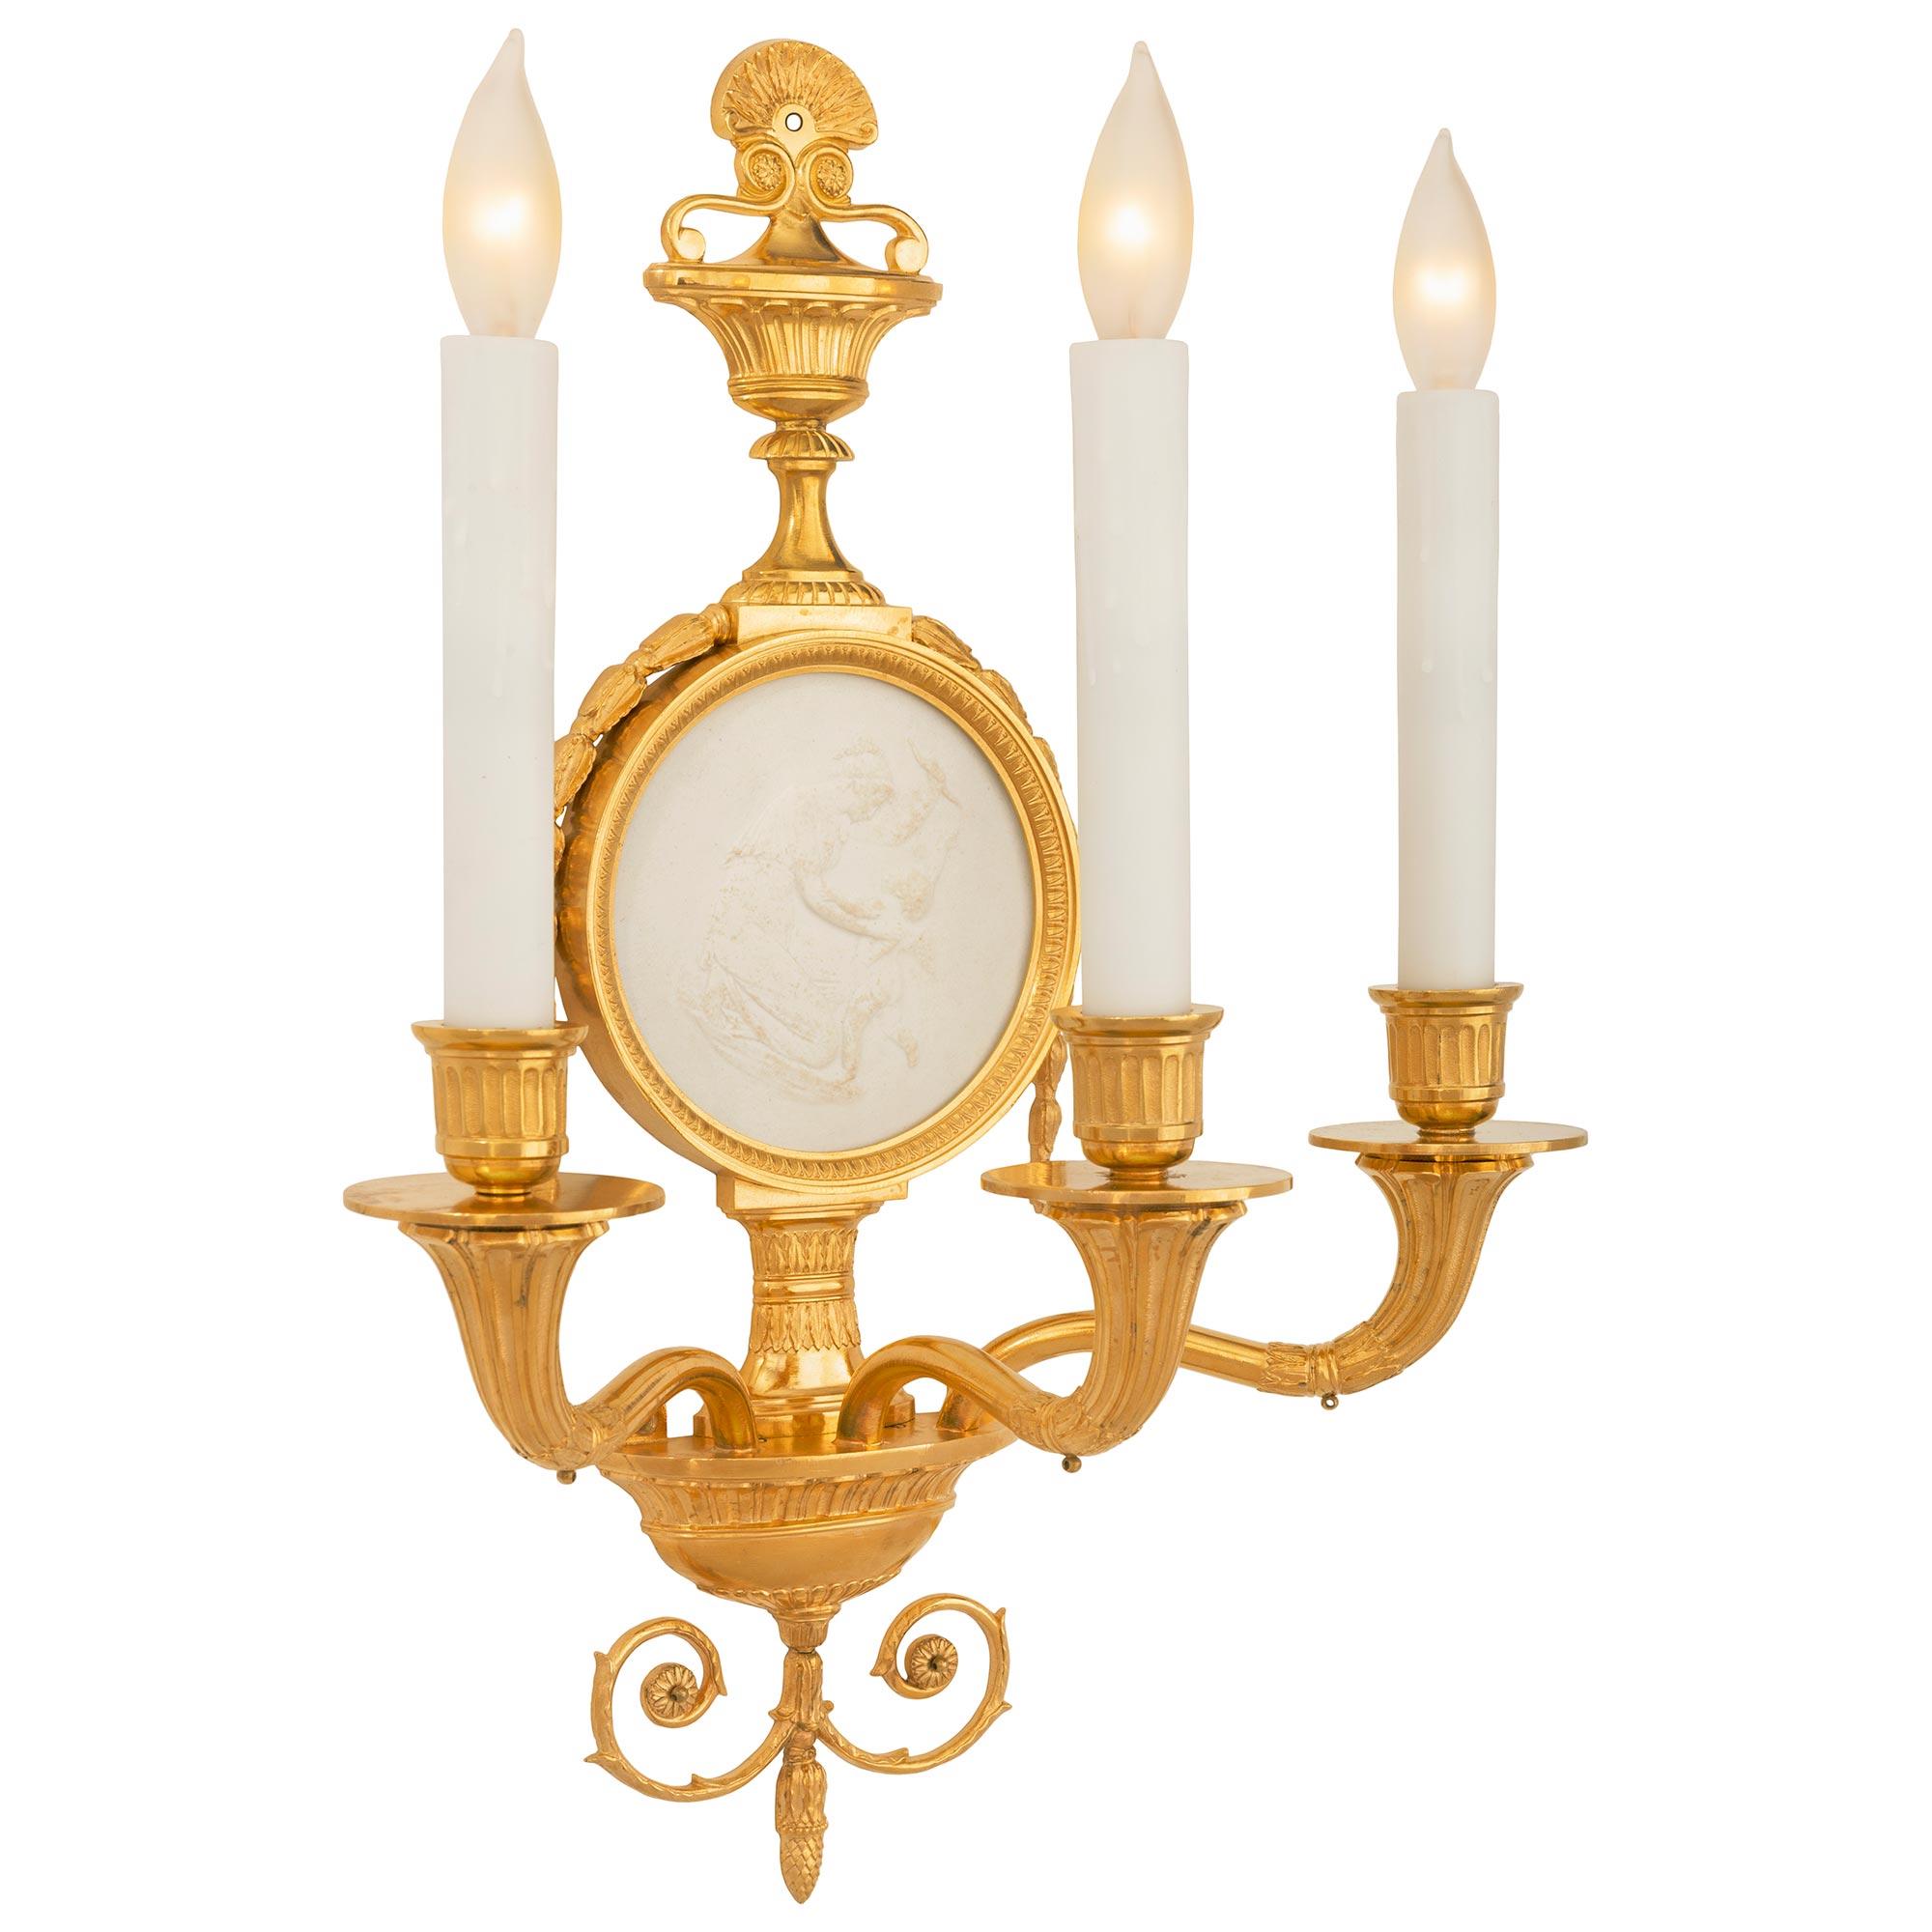 A beautiful and most elegant true pair of French 19th century Neo-Classical st. Biscuit de Sèvres Porcelain and ormolu sconces. Each three arm sconce is centered by fine bottom elongated acorn finials below most decorative scrolled foliate Rinceau